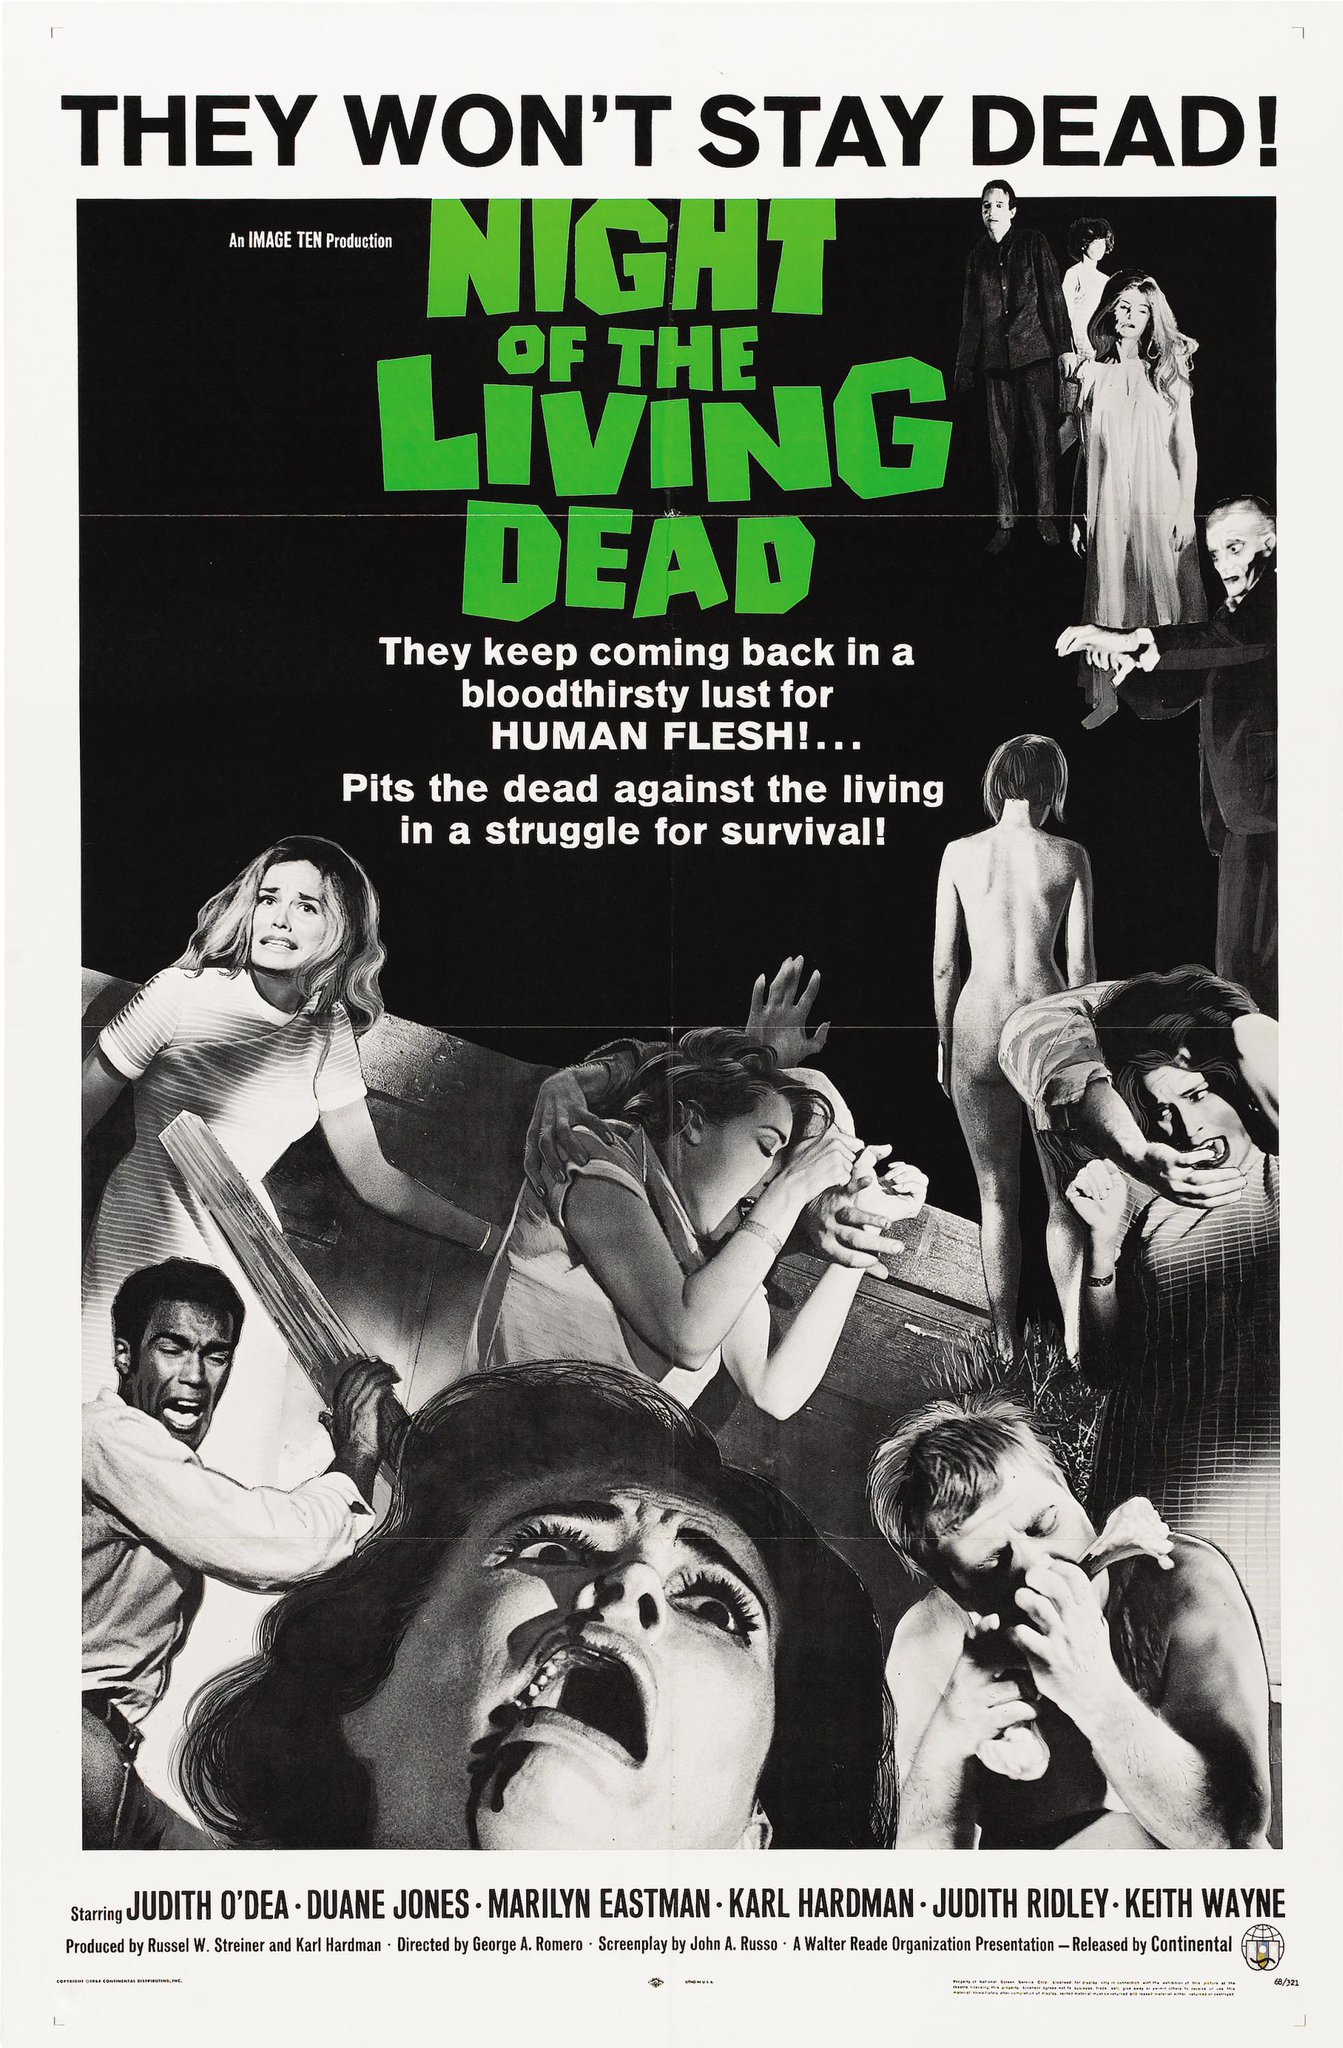 Happy 77th birthday to George A. Romero. Night of the Living Dead, 1968. 